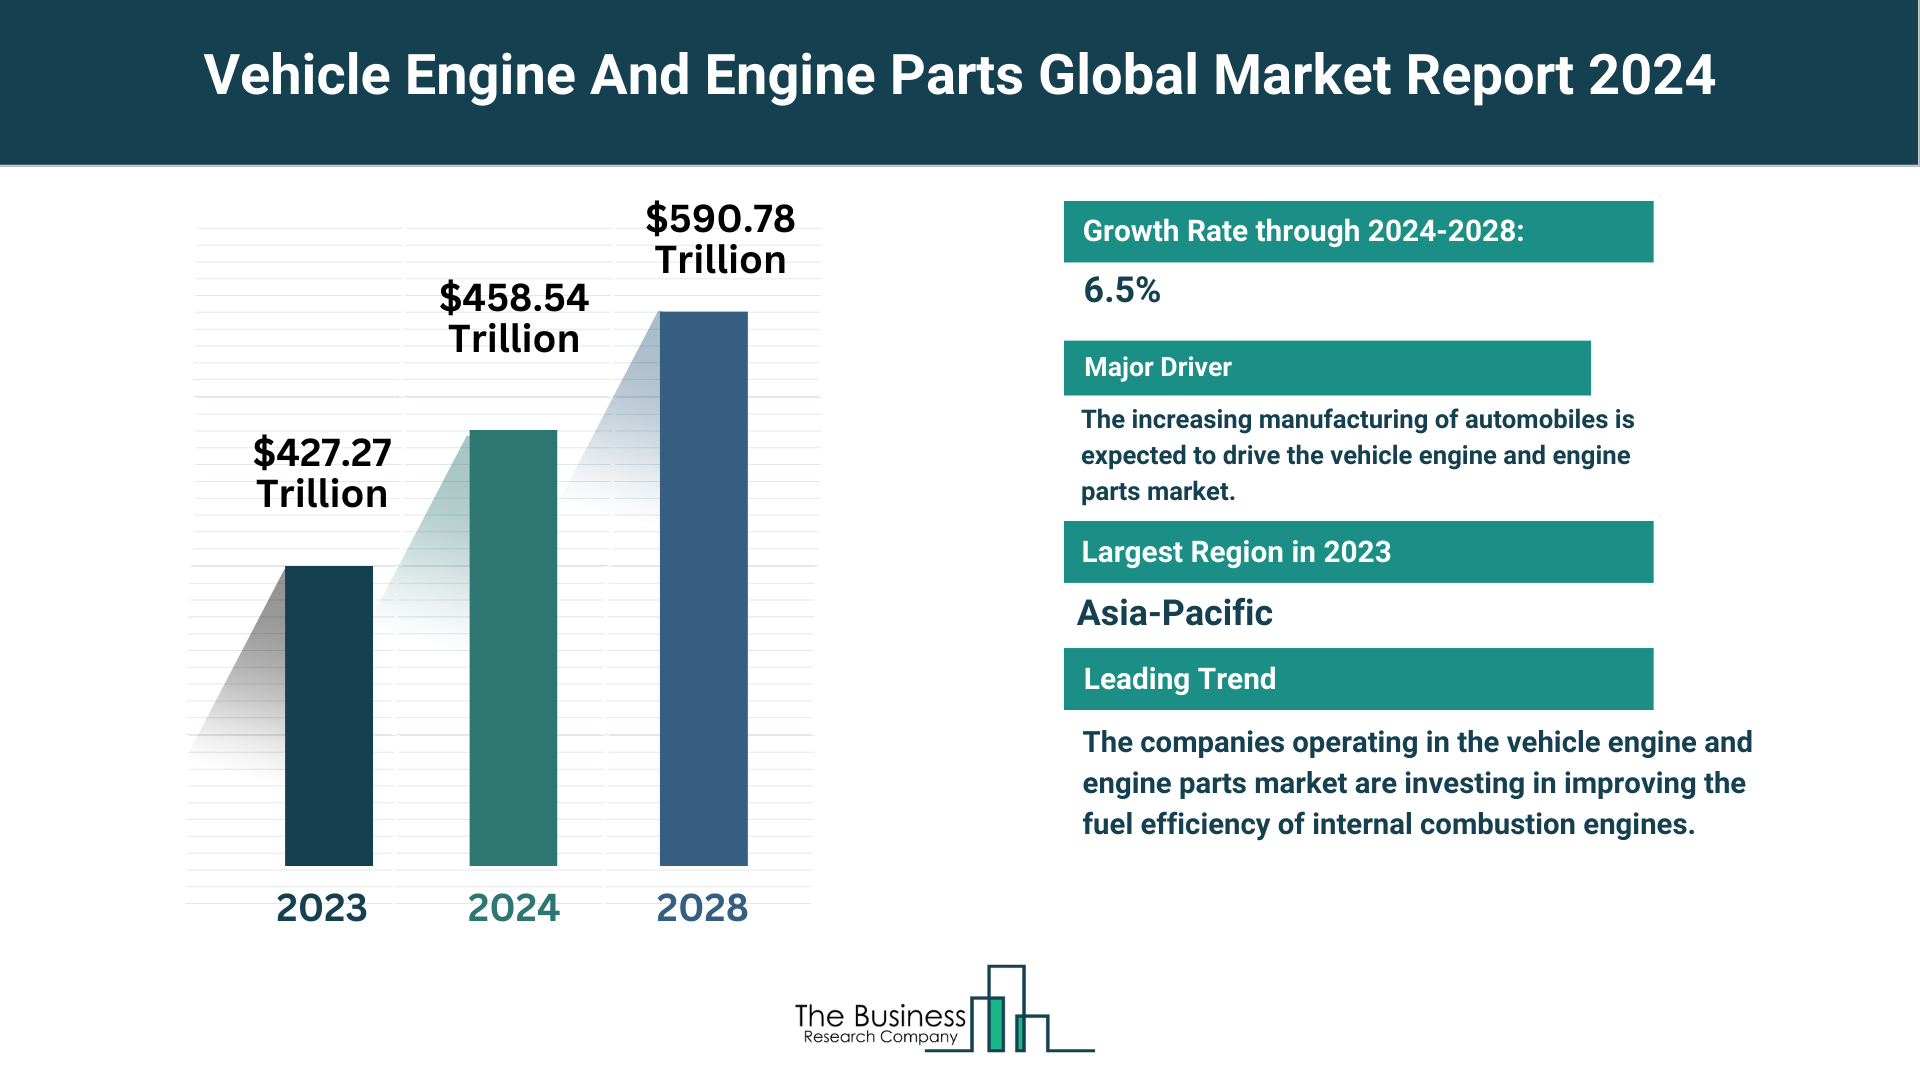 5 Major Insights Into The Vehicle Engine And Engine Parts Market Report 2024